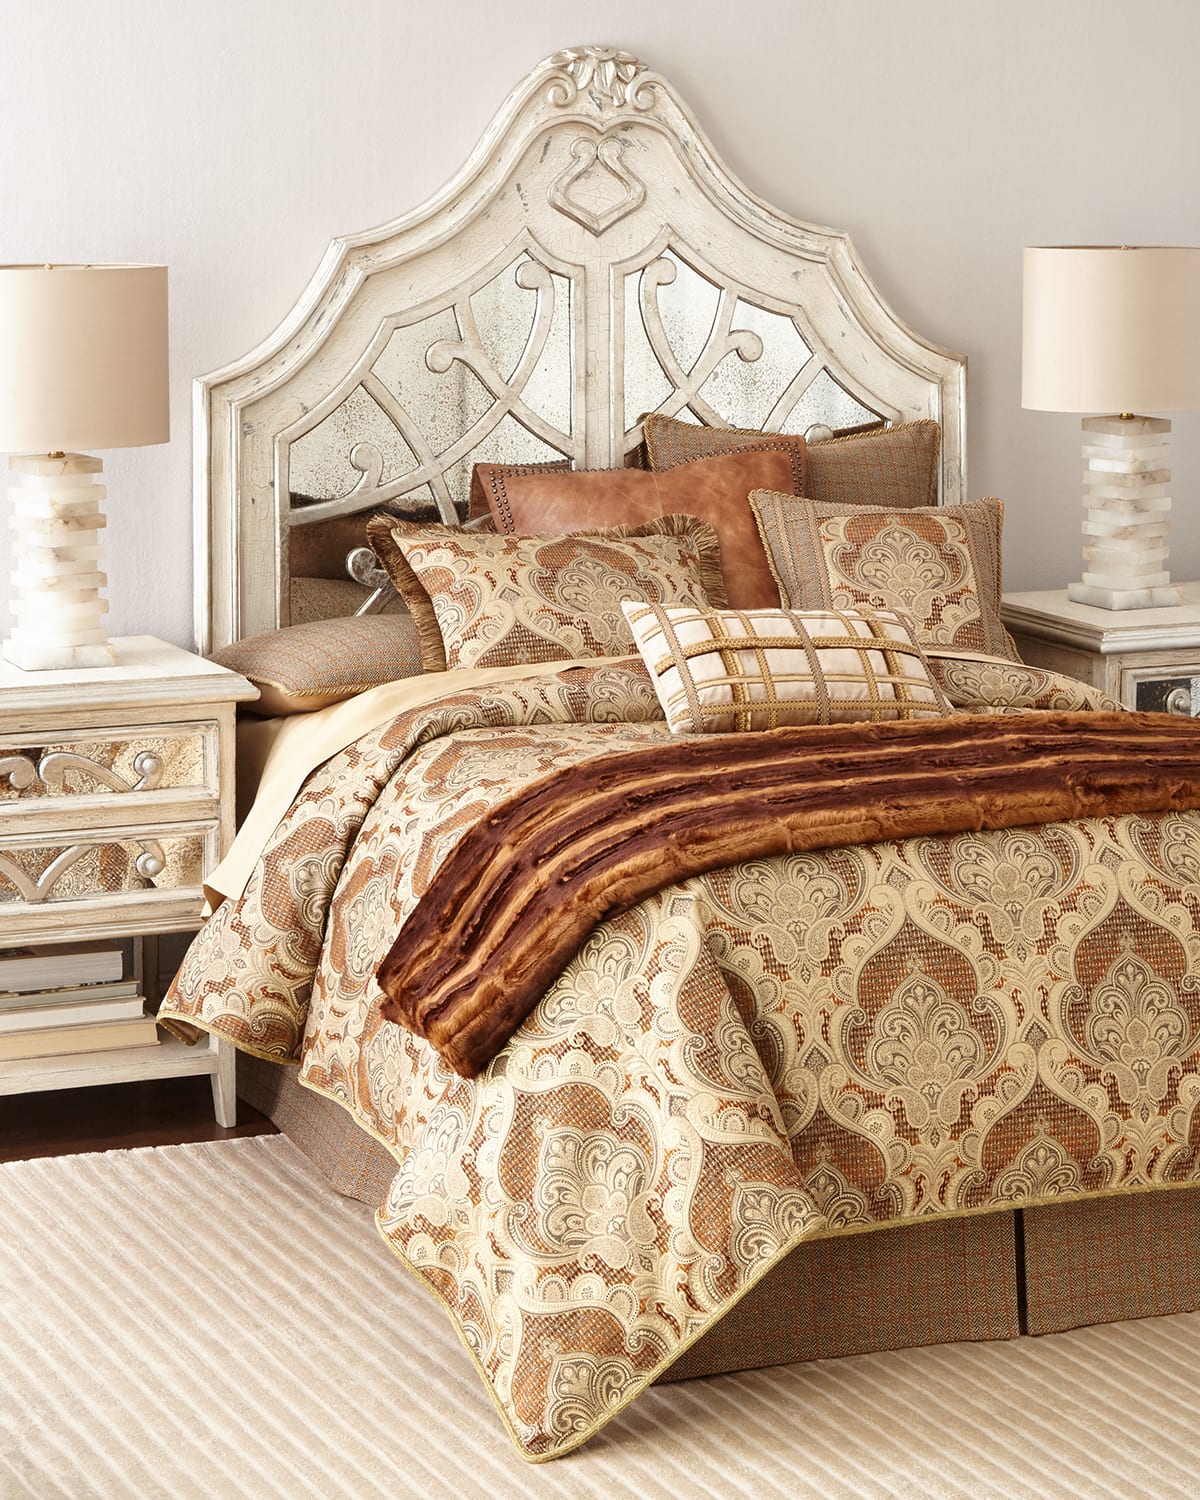 Peninsula Home Collection Lynley Mirrored King Headboard